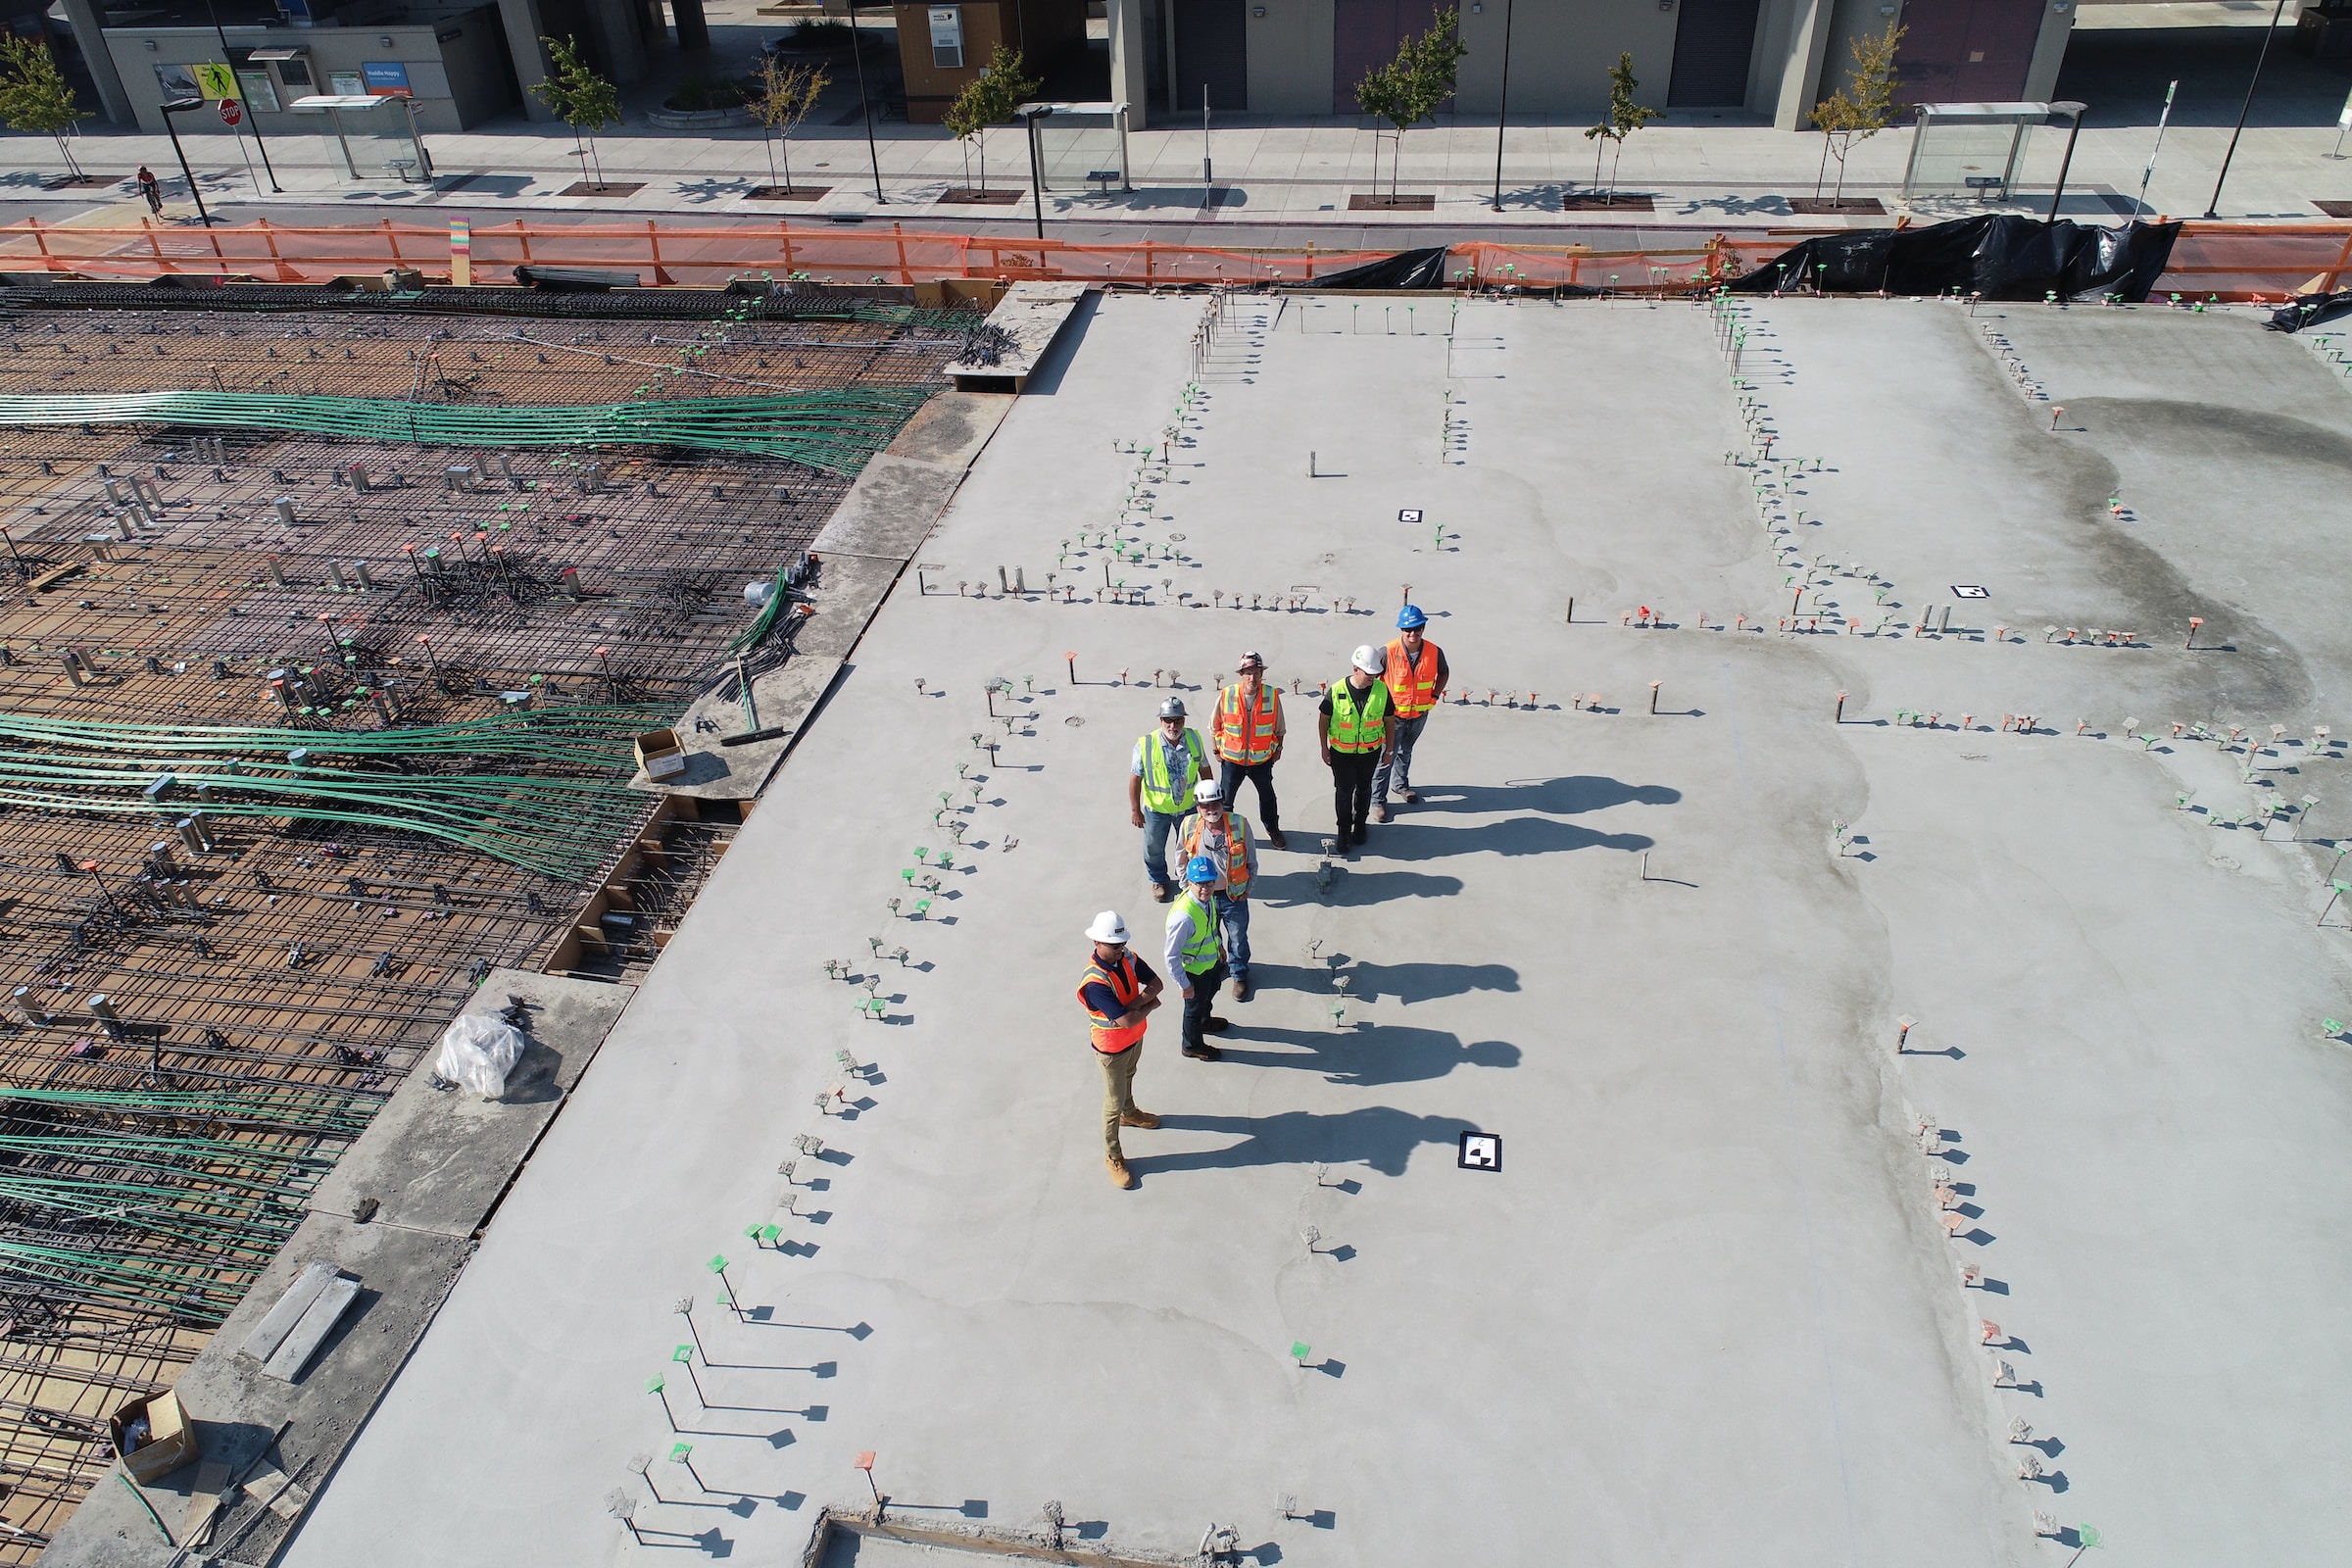 People Standing on a Rooftop in High Visibility Jackets and Hard Hats